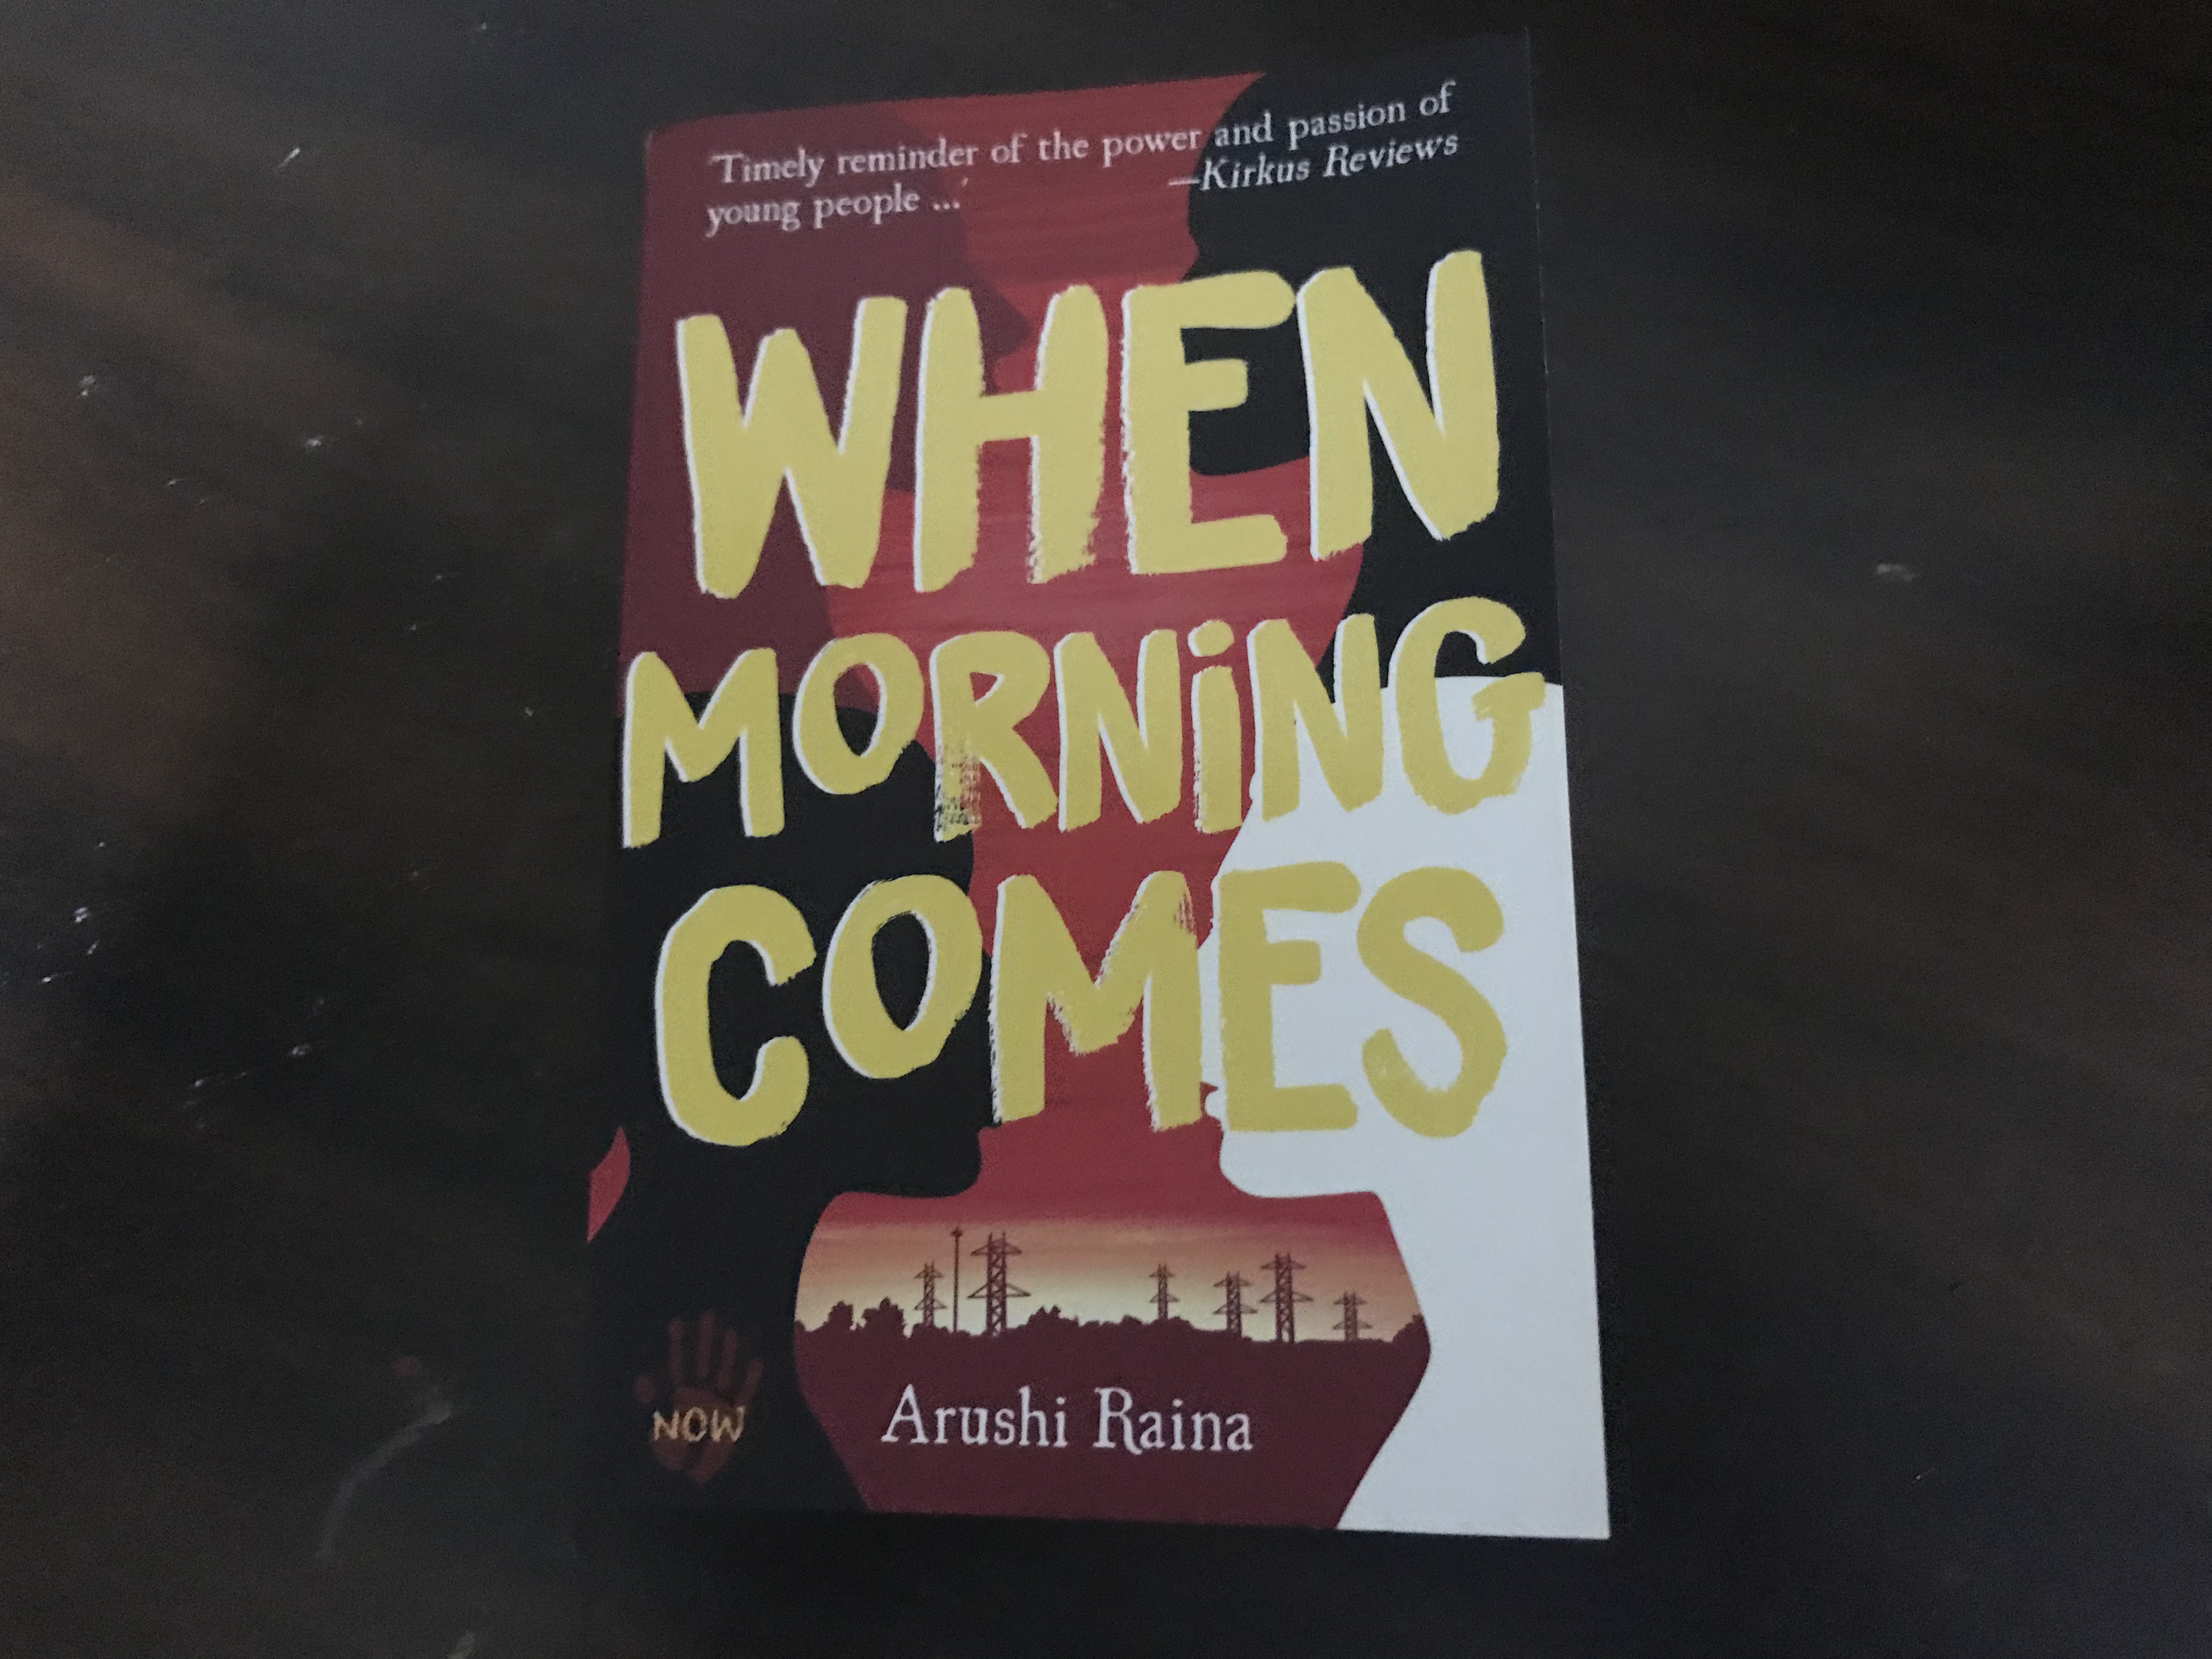 You are currently viewing When Morning Comes by Arushi Raina: Duckbill brings a potent saga of youth caught in turmoil, as a part of the “Not Our War” series